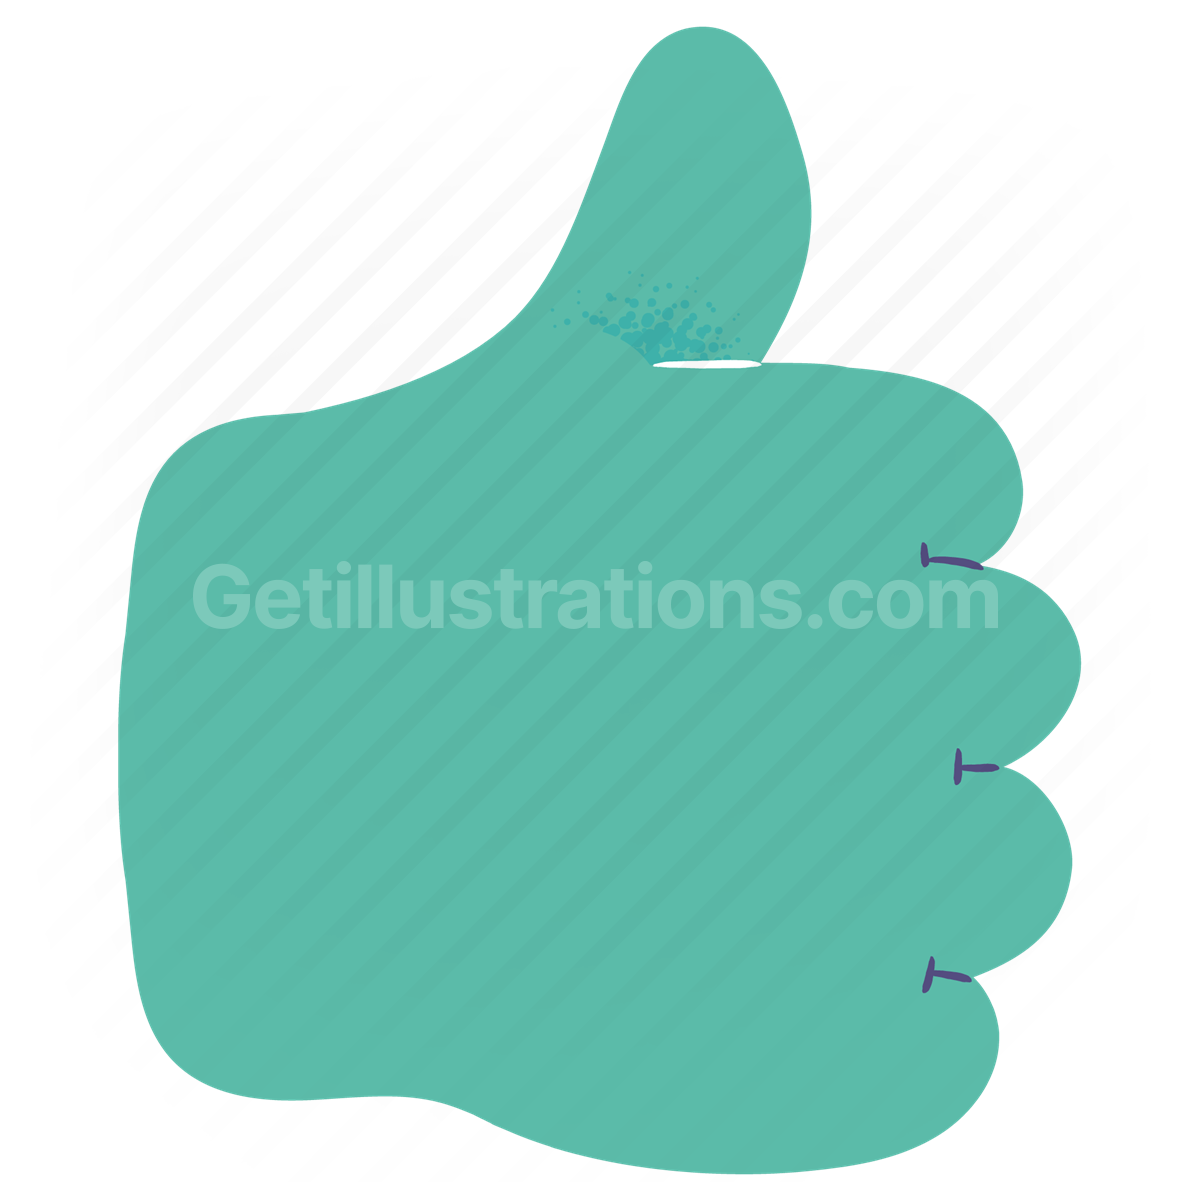 hand gesture, gesture, hand, sign, gesturing, thumbs up, approve